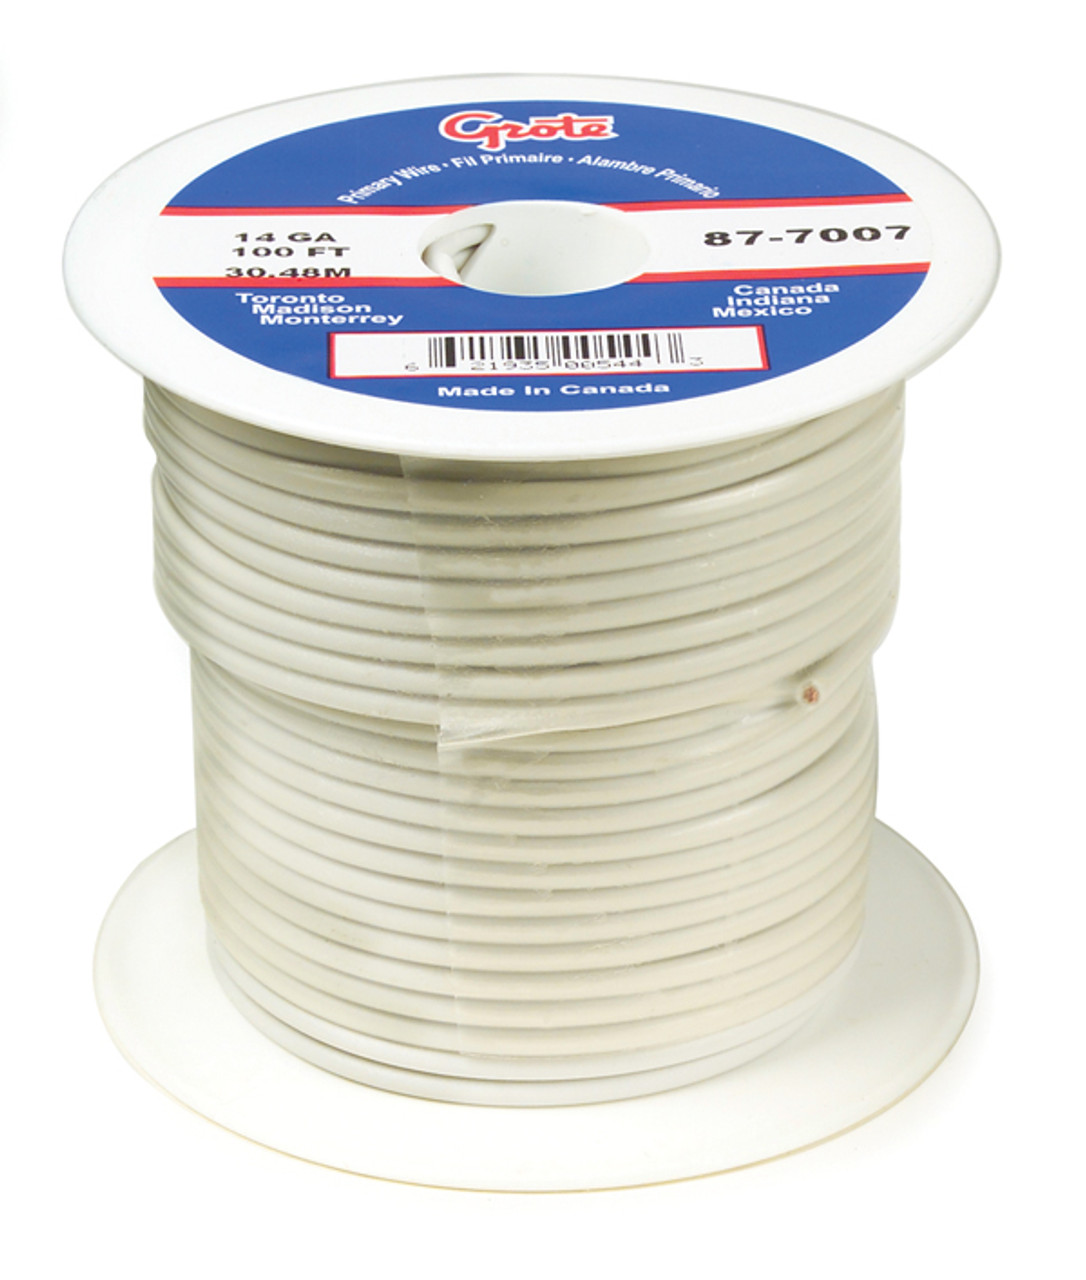 12 AWG General Purpose Thermo Plastic Wire @ 100' - White  87-6007